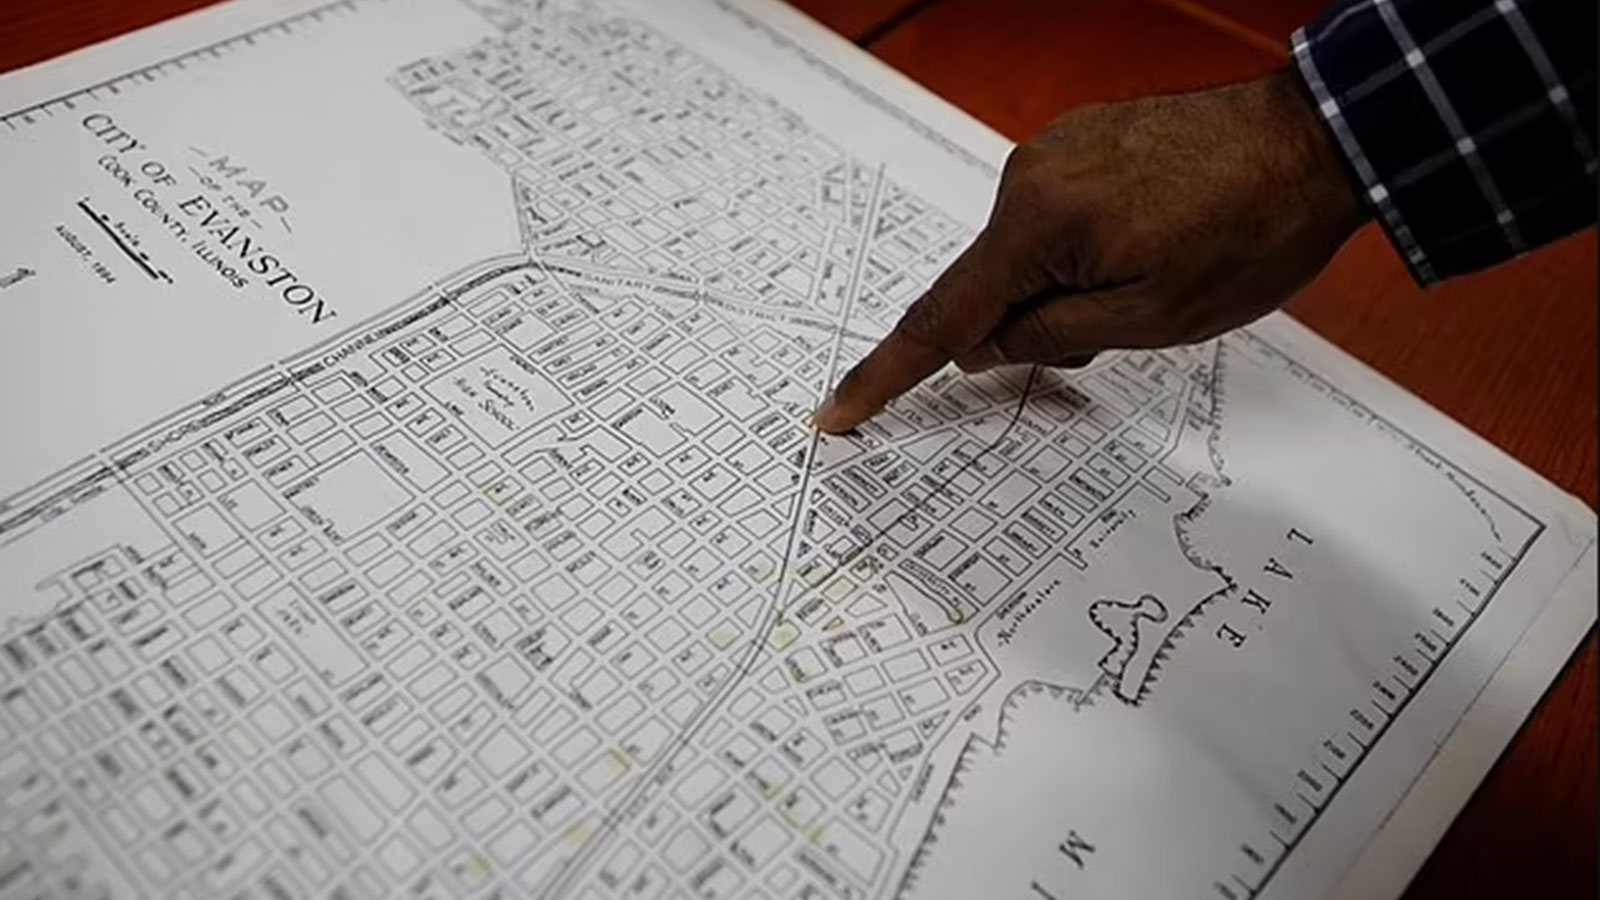 Community historian Morris 'Dino' Robinson, points to the borders of the Fifth Ward, which was the area of Evanston the city's Black citizens were forced to move to due to redlining between 1919 and 1969